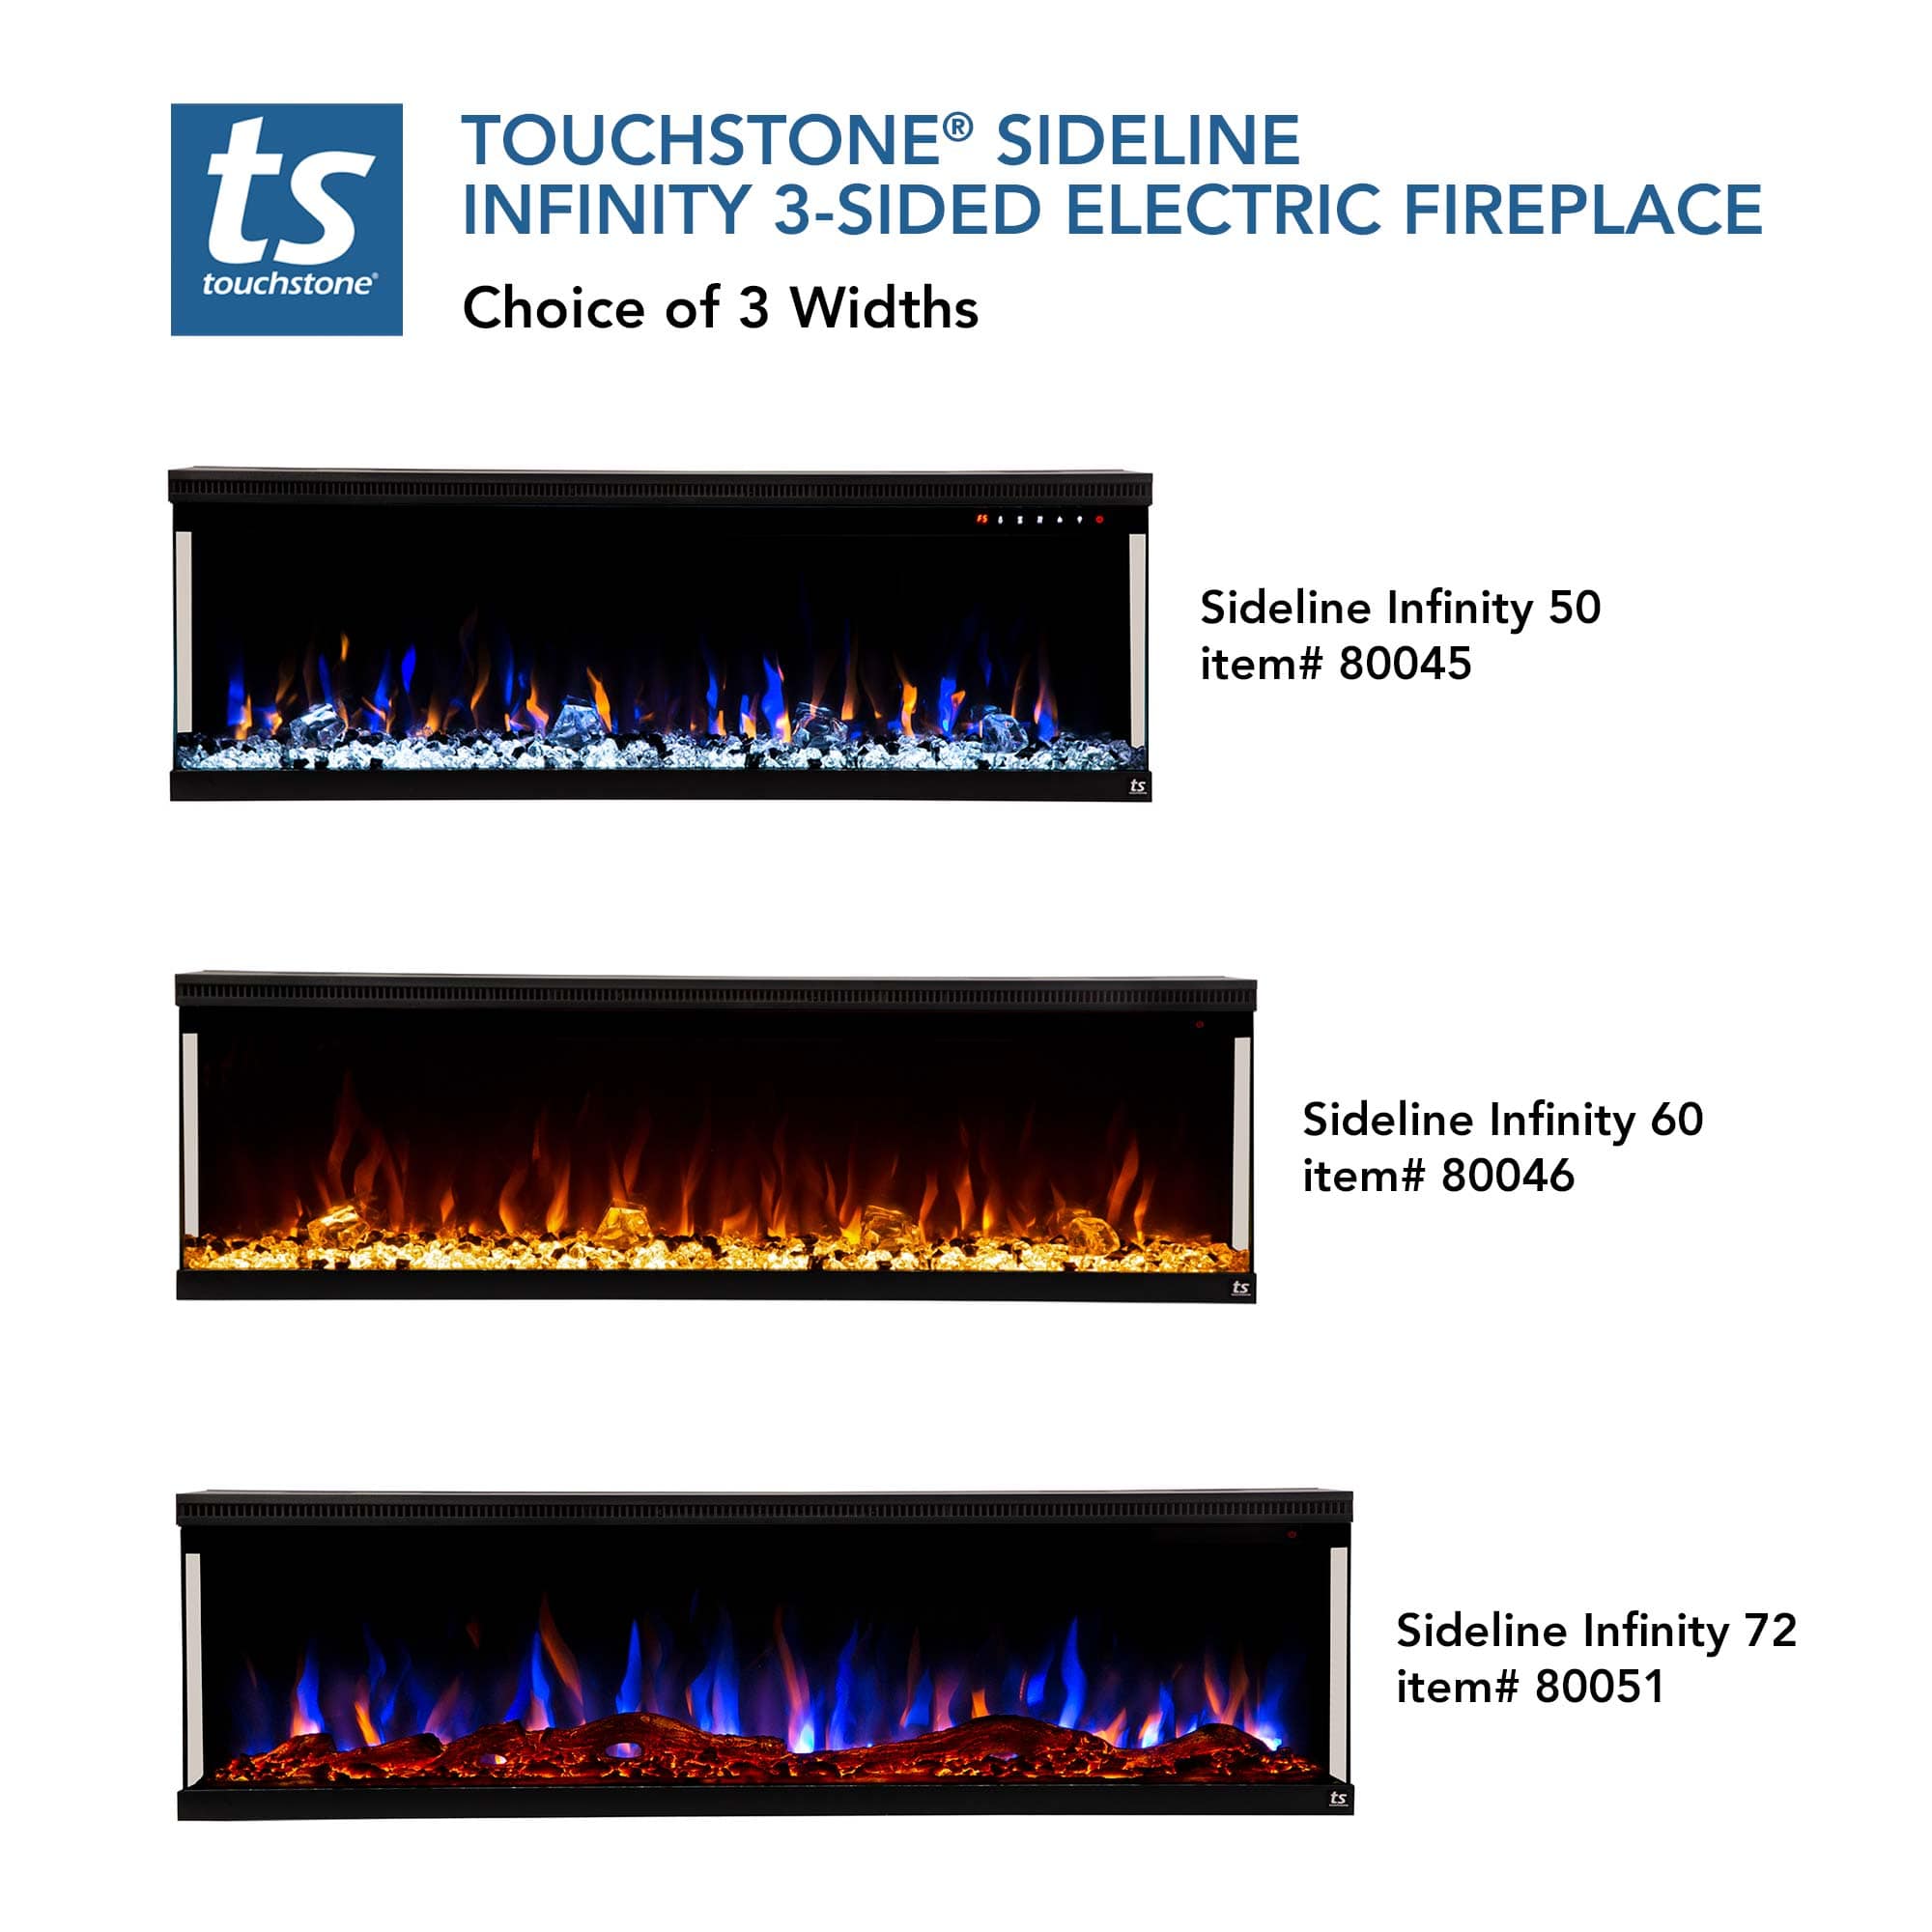 Touchstone Sideline Infinity available in 3 widths